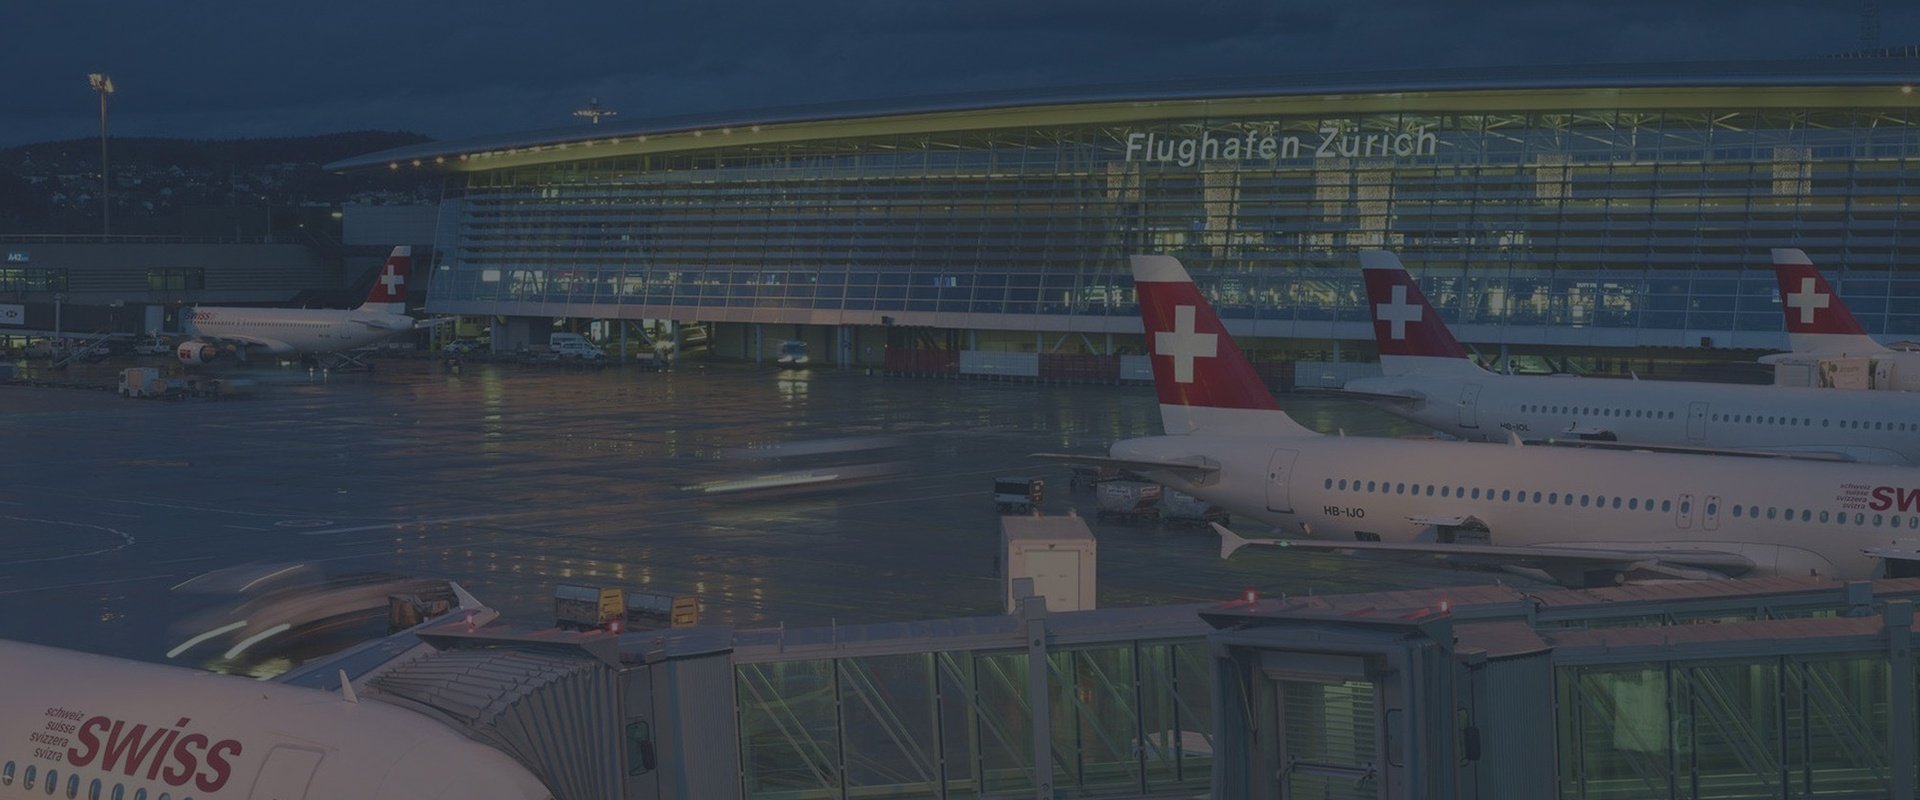 SAP HCM REPORTING SOARS AT ZÜRICH AIRPORT